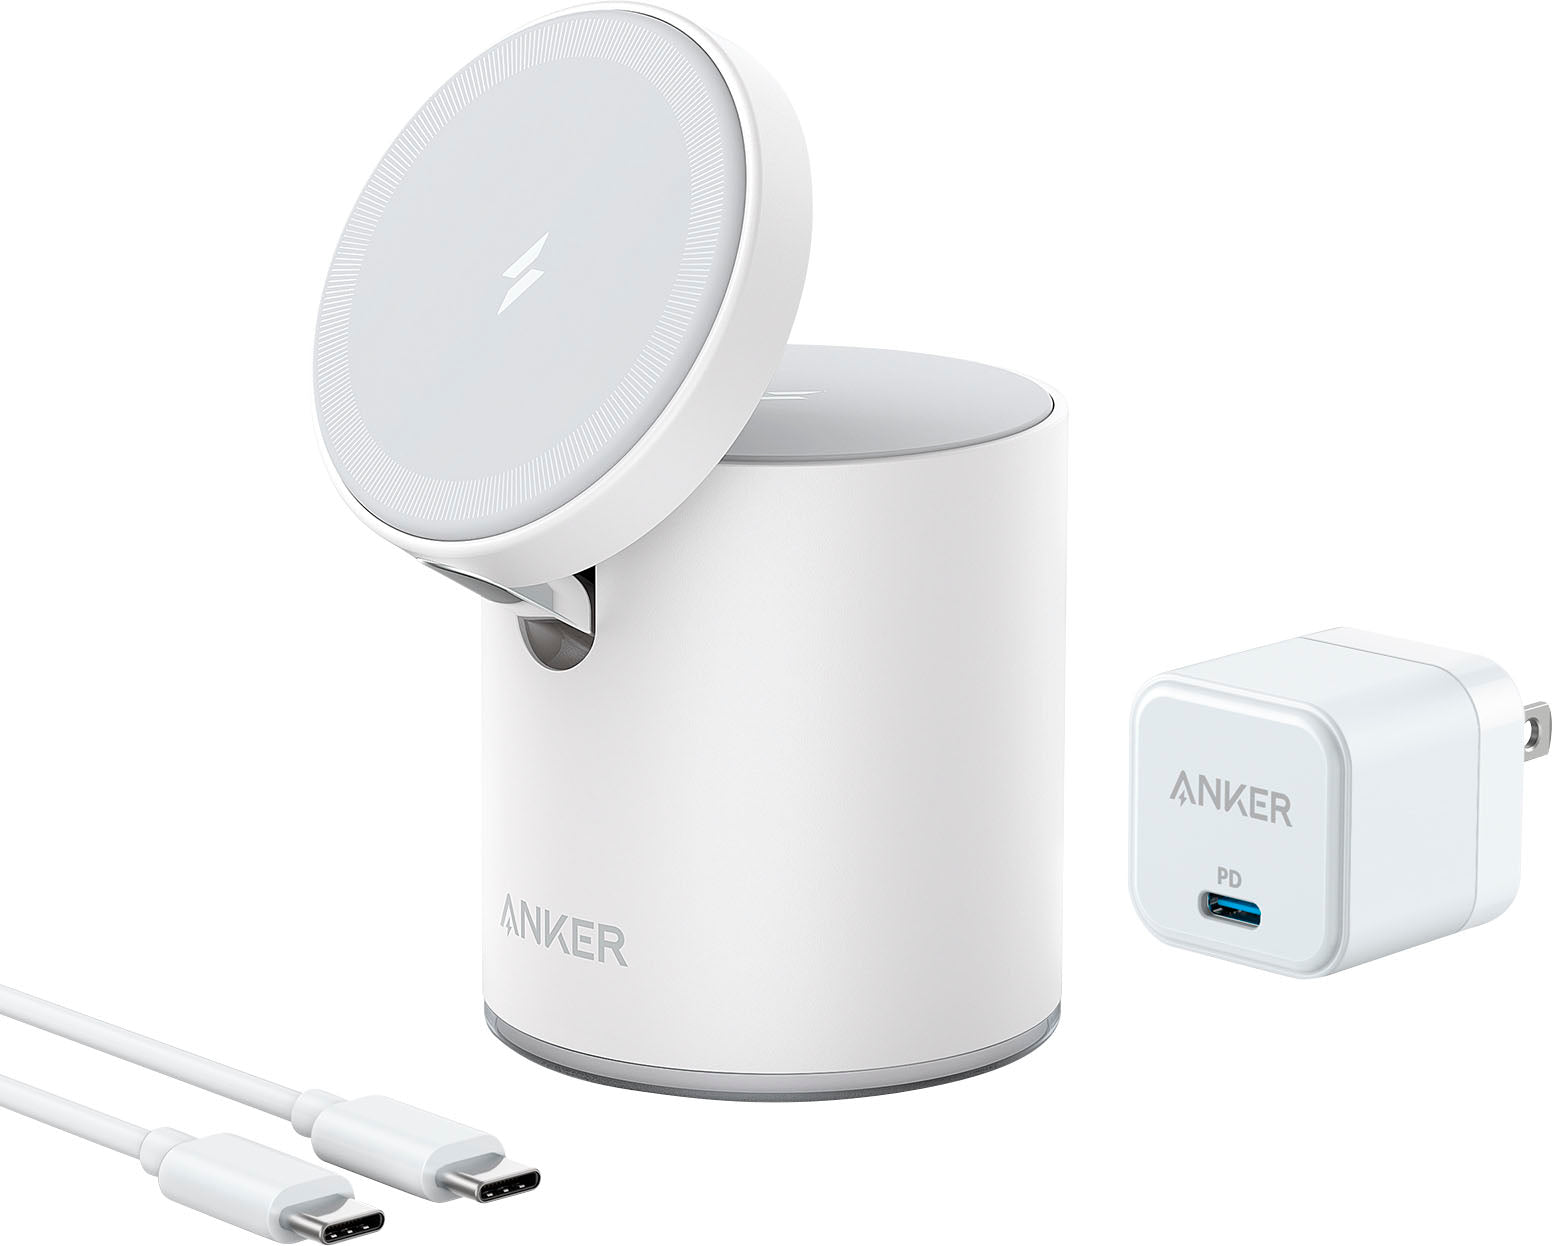 Anker - B2568121-1 MagGo Magnetic 2-in-1 Wireless Charger for iPhone 12 & 13 MagSafe Compatible Devices - White